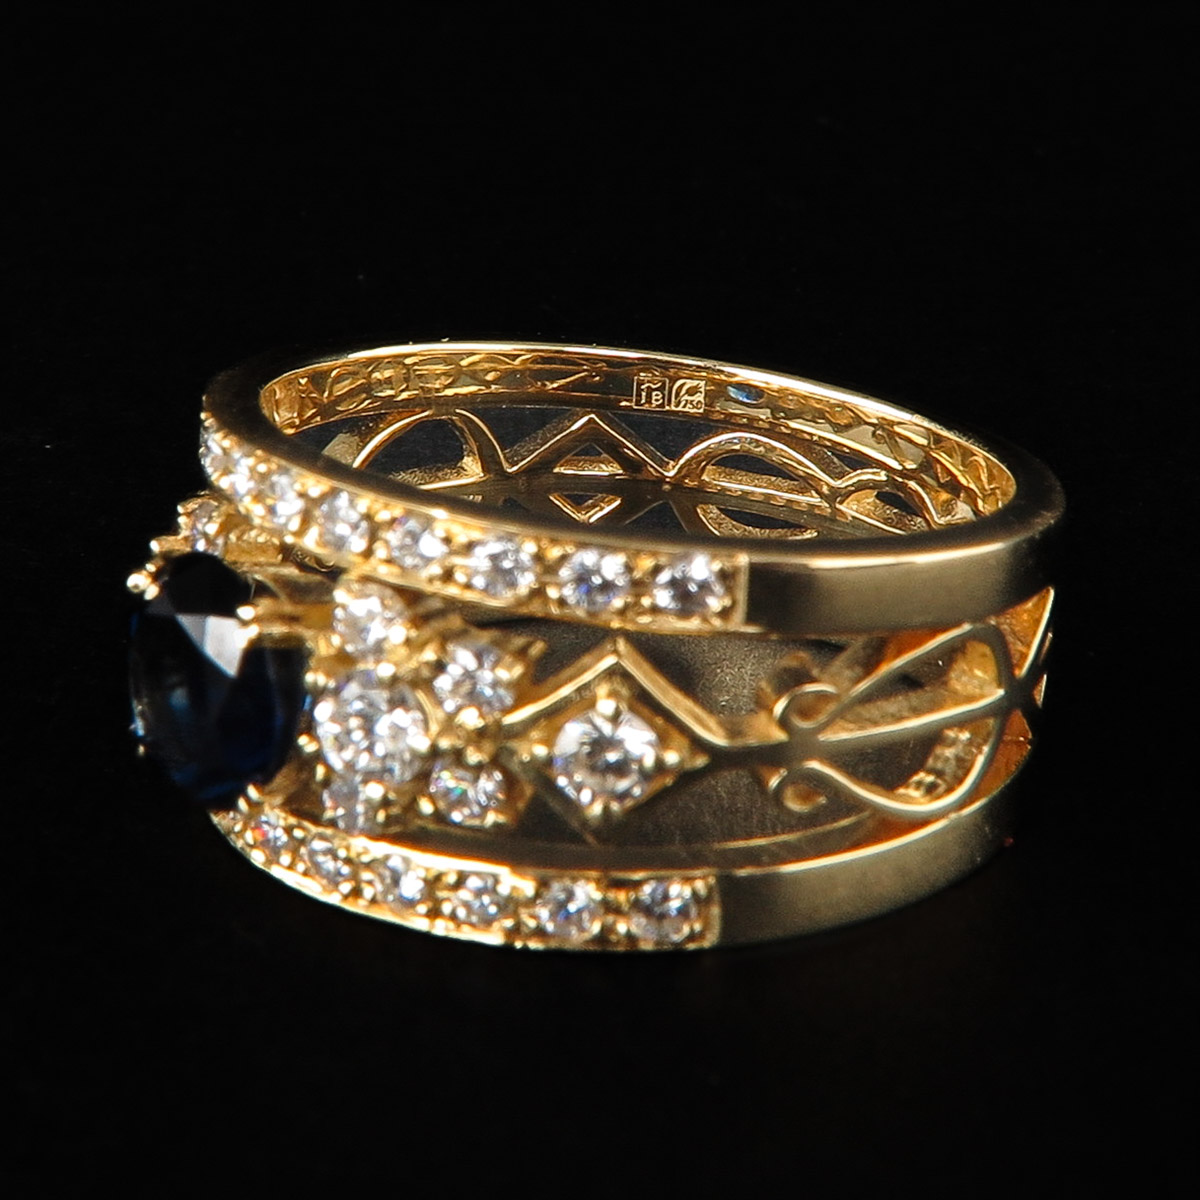 A Ladies 18k Gold Sapphire and Diamond Ring - Image 4 of 4